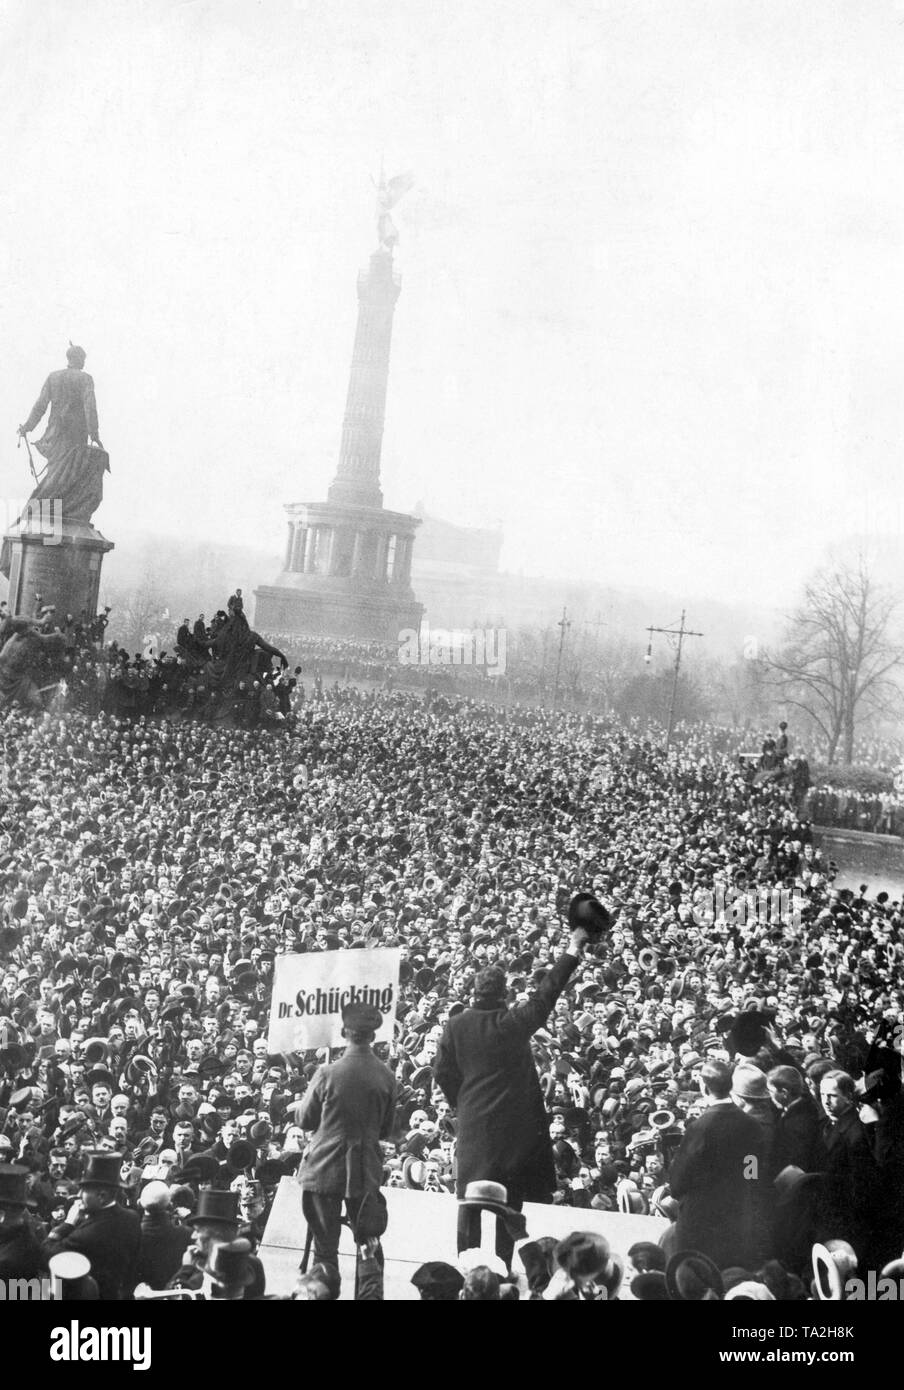 Presumably Dr. Walther Schuecking, a liberal politician and judge at the International Court of Justice in Hague until 1933, is holding a speech at a political rally at the Siegessaeule (Victory Column) in Berlin. Stock Photo